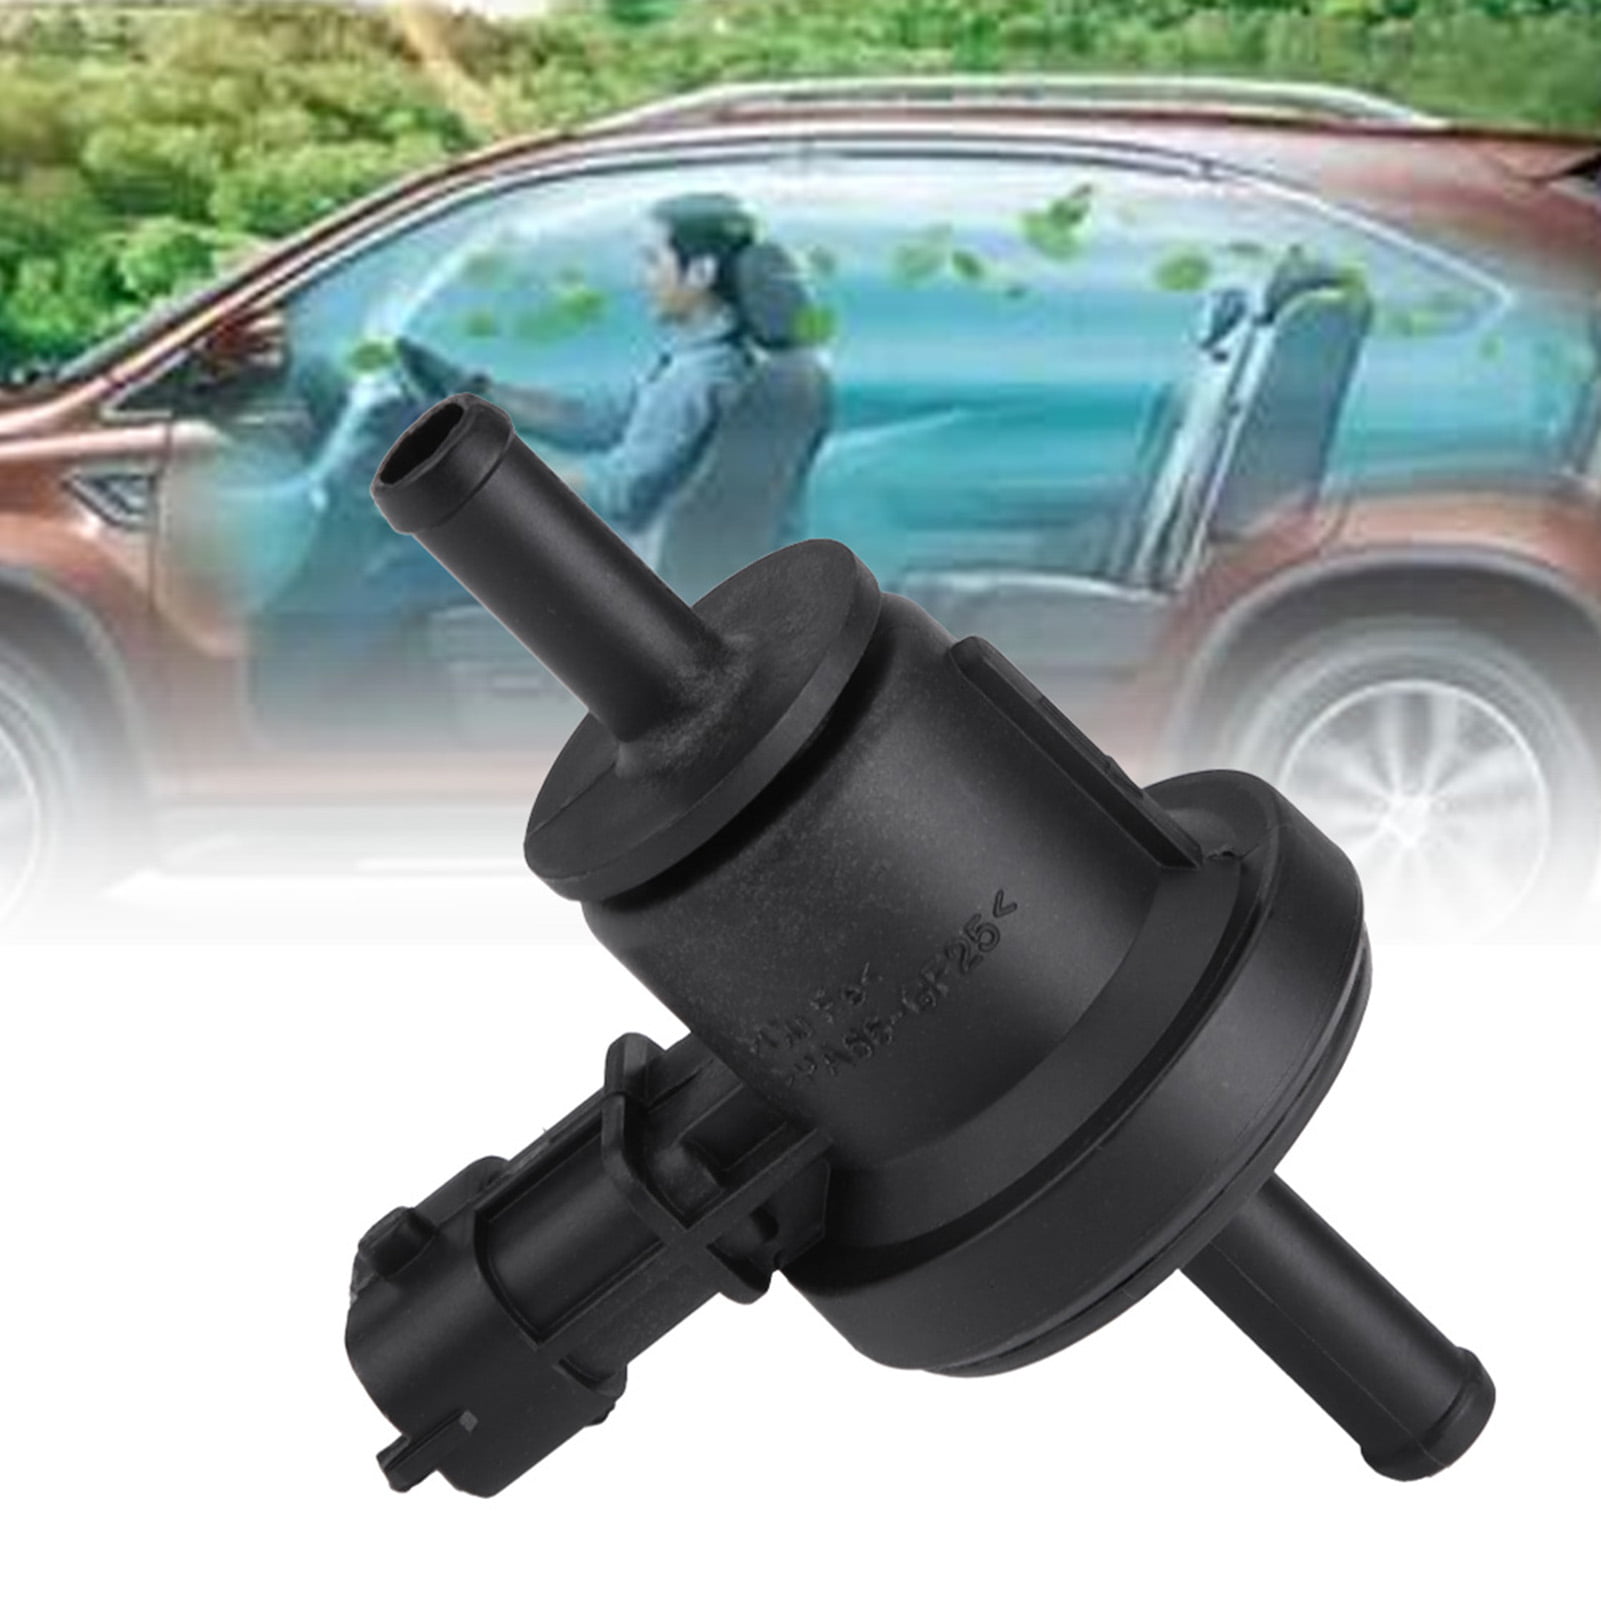 Fuel Canister Purge Valve, Black 2891026900 Perfect Fitness For Car  Replacement For Elantra 2.0L 2012-2007